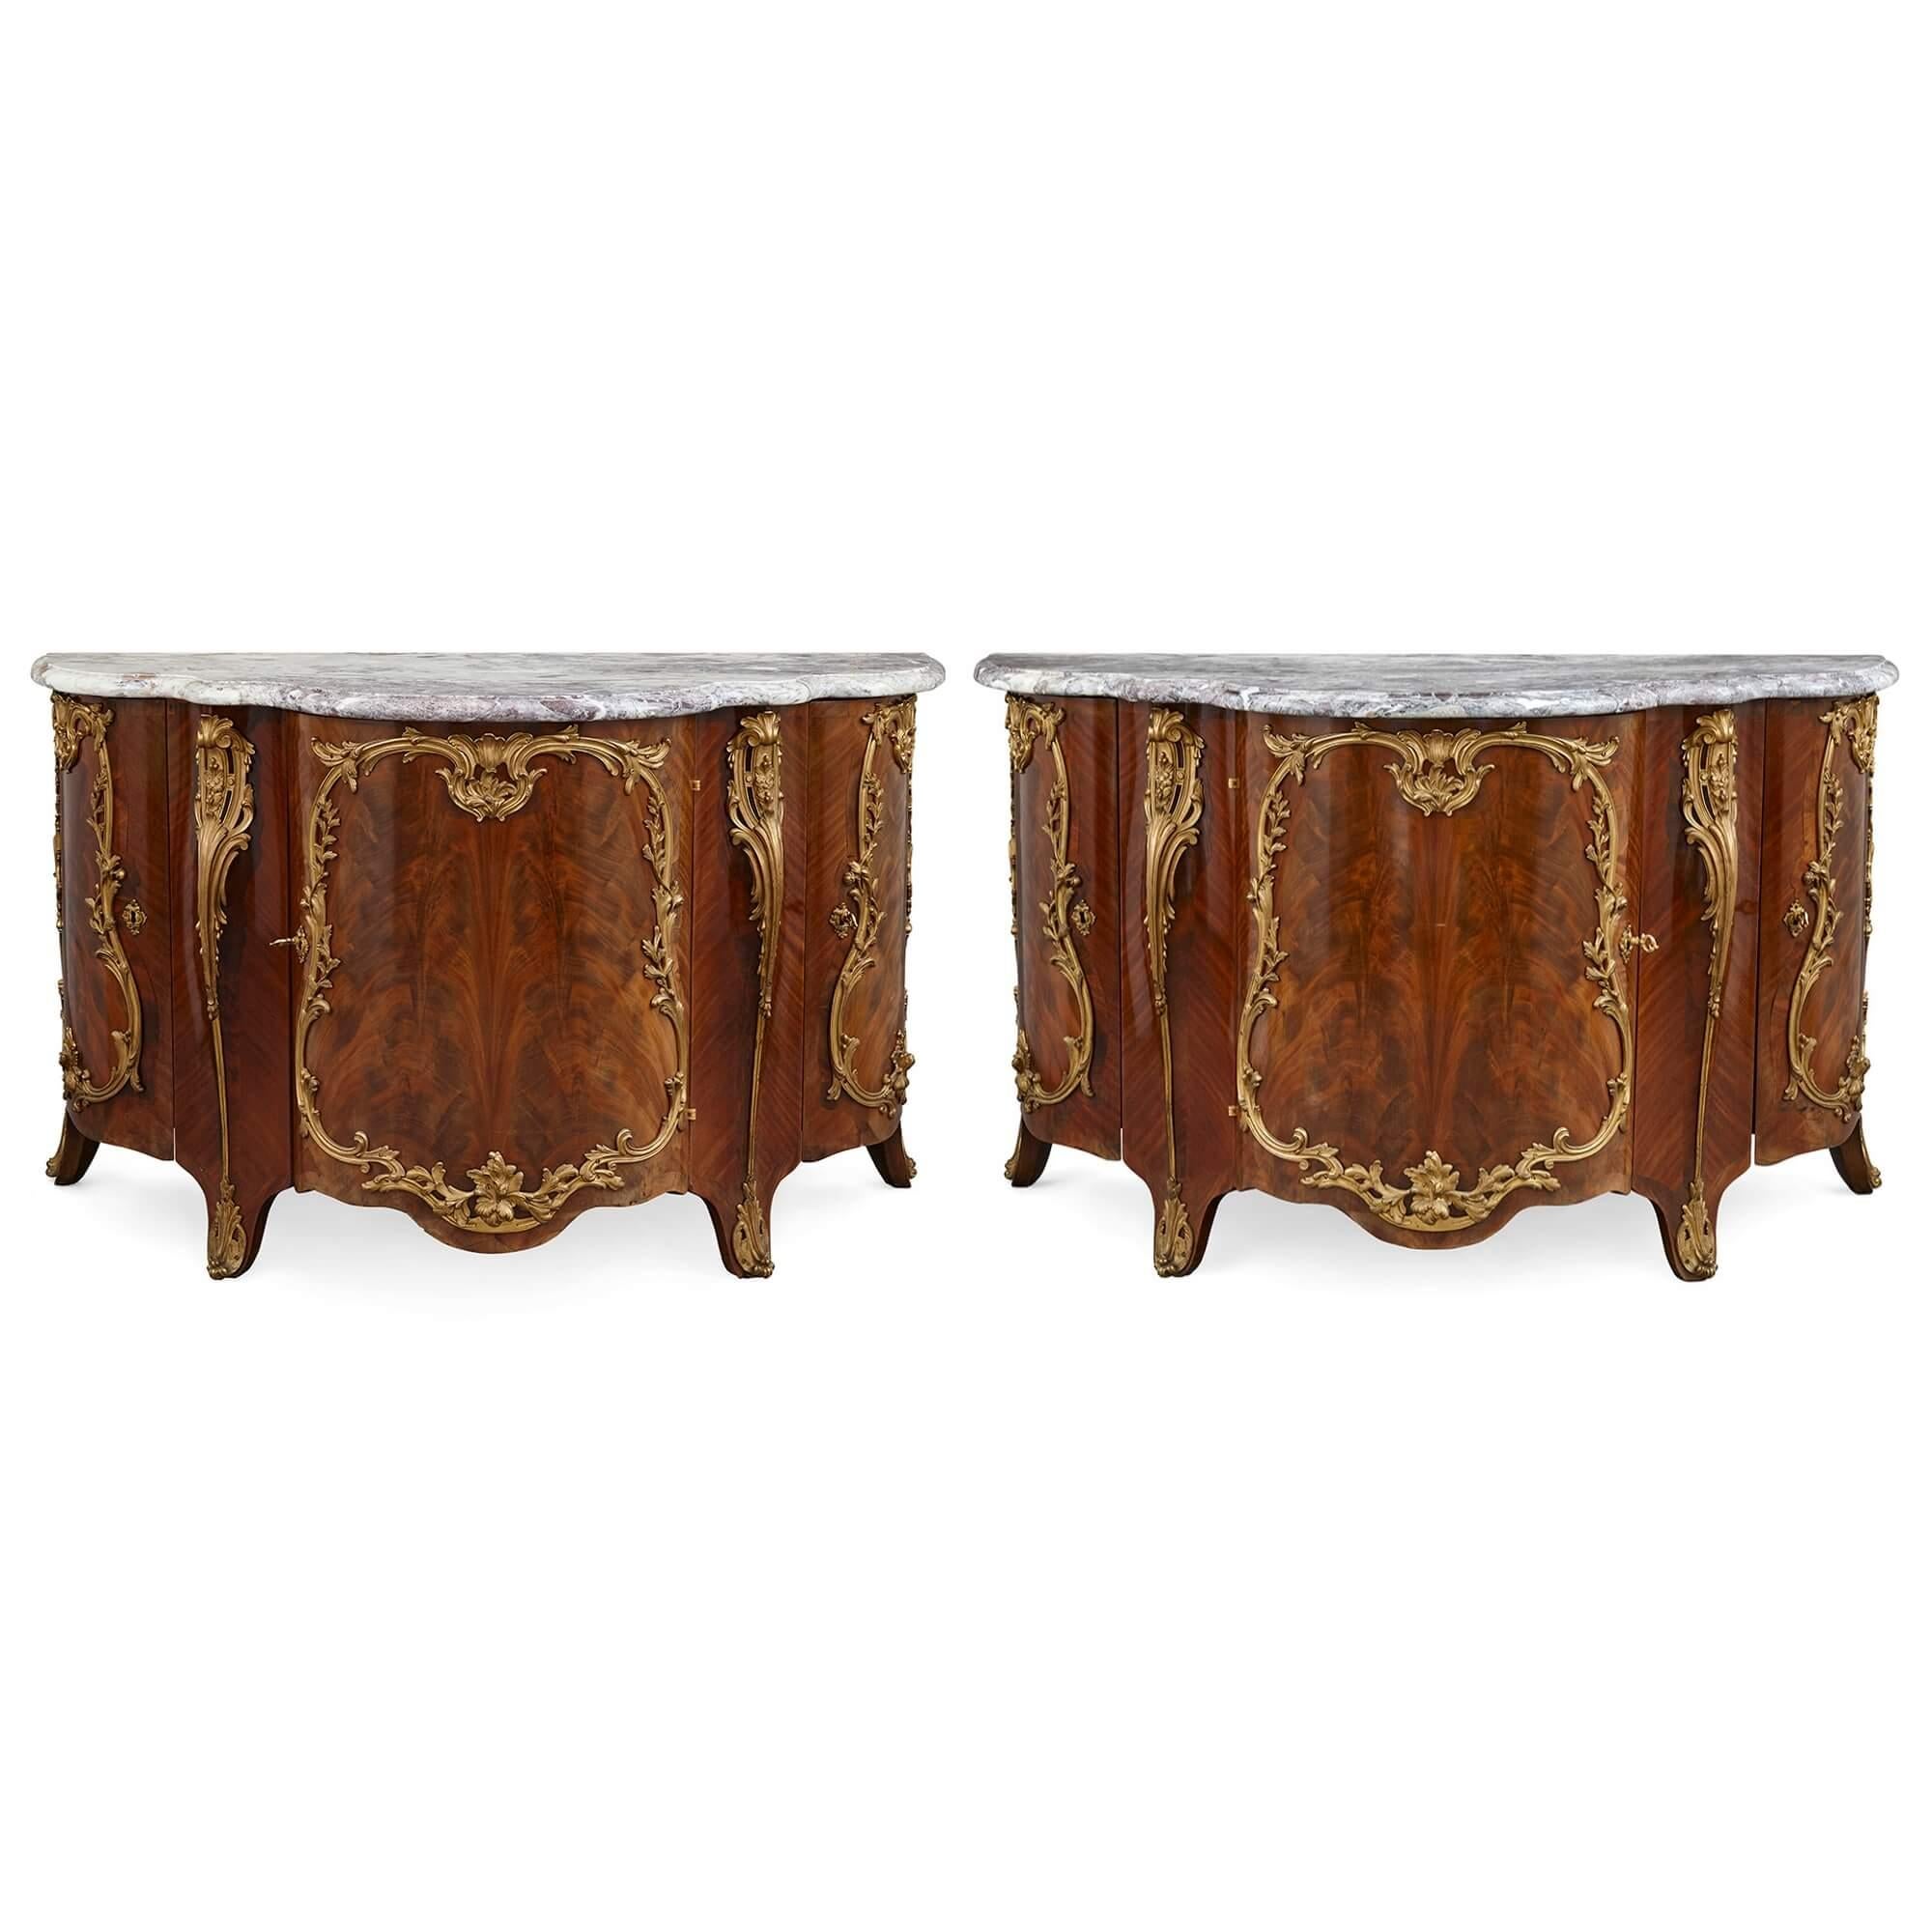 Pair of Louis XV style ormolu-mounted mahogany and marble commodes.
French, 19th Century
Measures: Height 82 cm ,width 134 cm ,depth 59 cm.

These remarkable pieces, large, and of rare and unusual design, are an excellent pair of Louis XV style